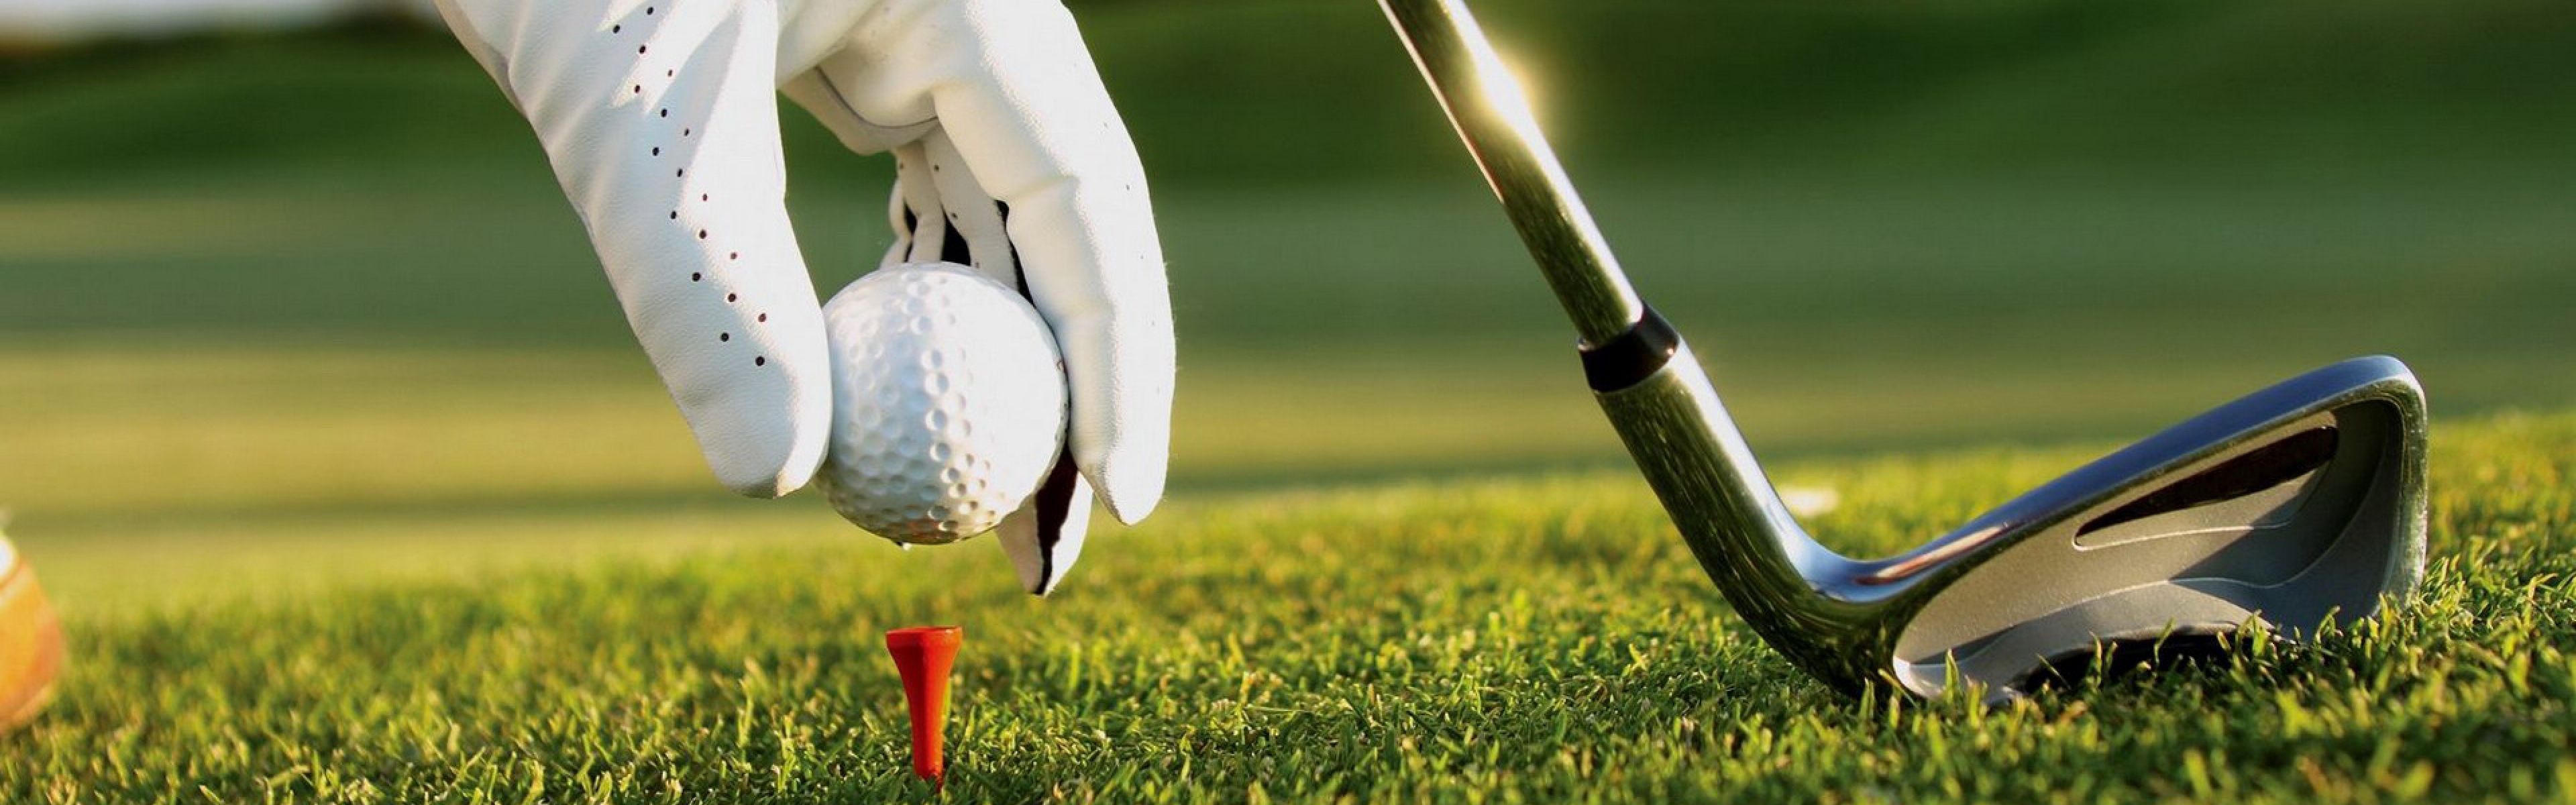 Golf Wallpaper for Facebook | Full HD Pictures